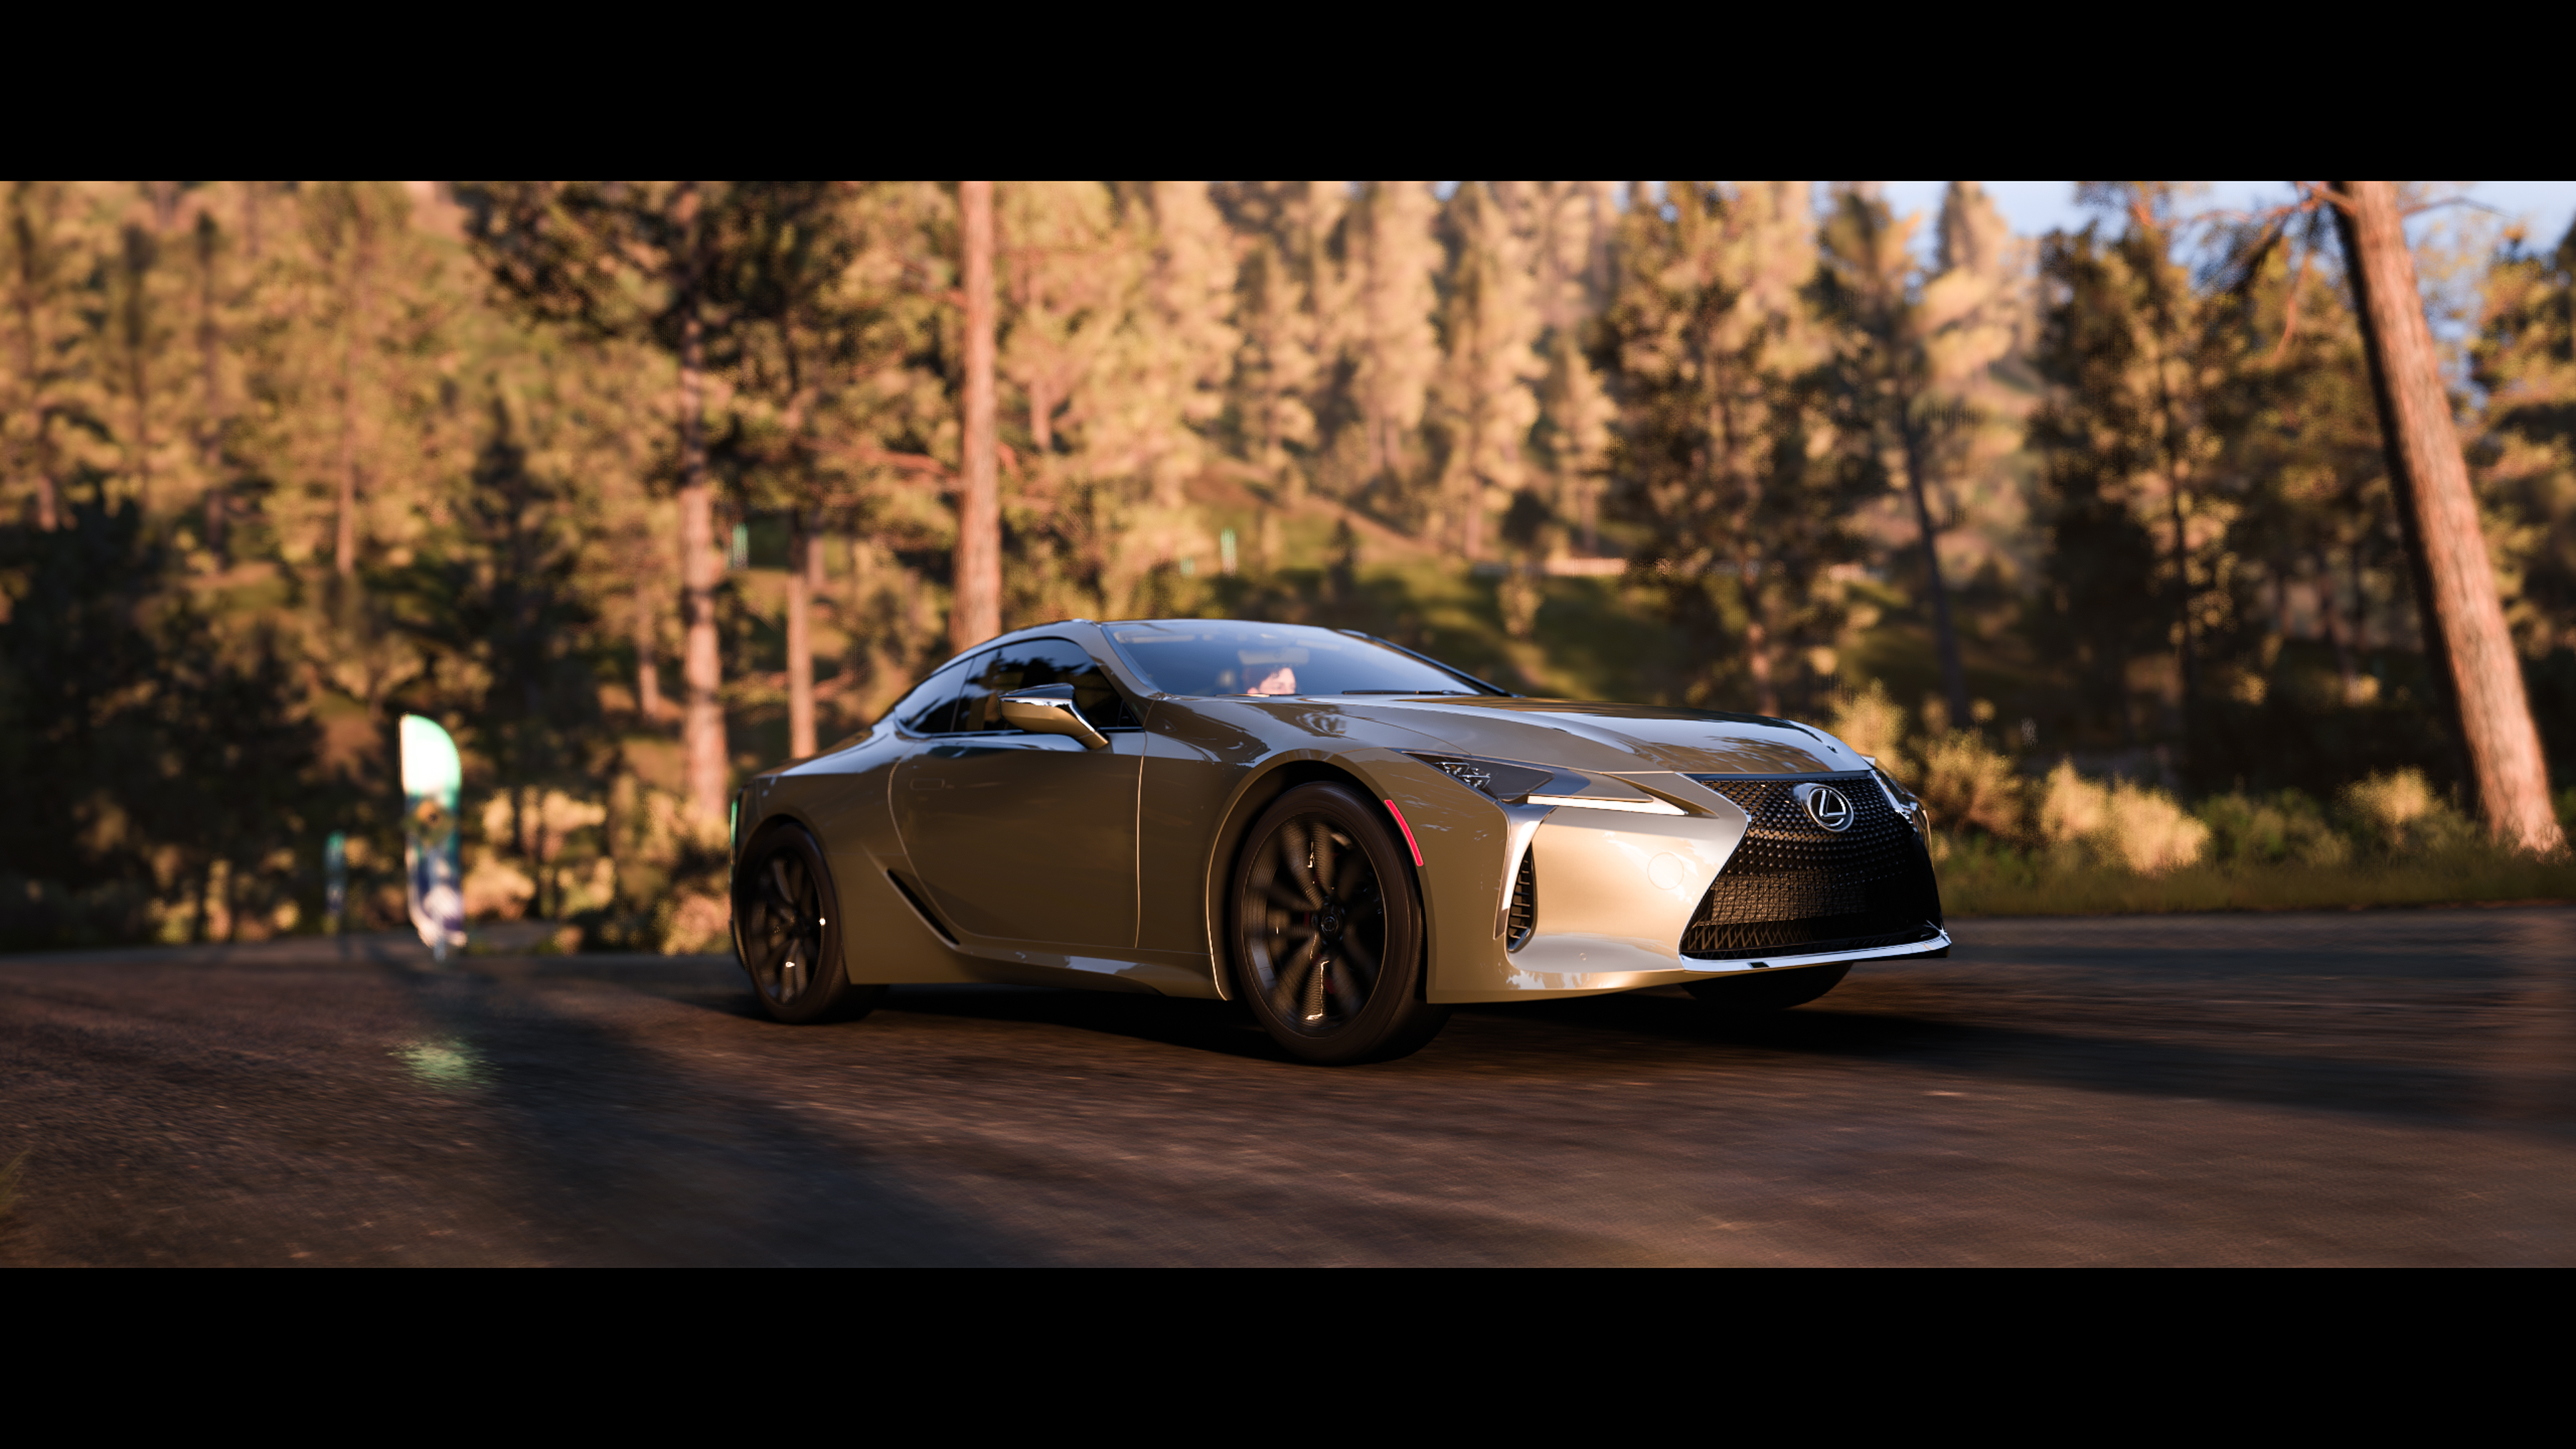 General 3600x2025 Forza Forza Horizon 5 Lexus Japanese cars PlaygroundGames trees video game art screen shot video game characters CGI video games sunlight frontal view headlights blurred blurry background